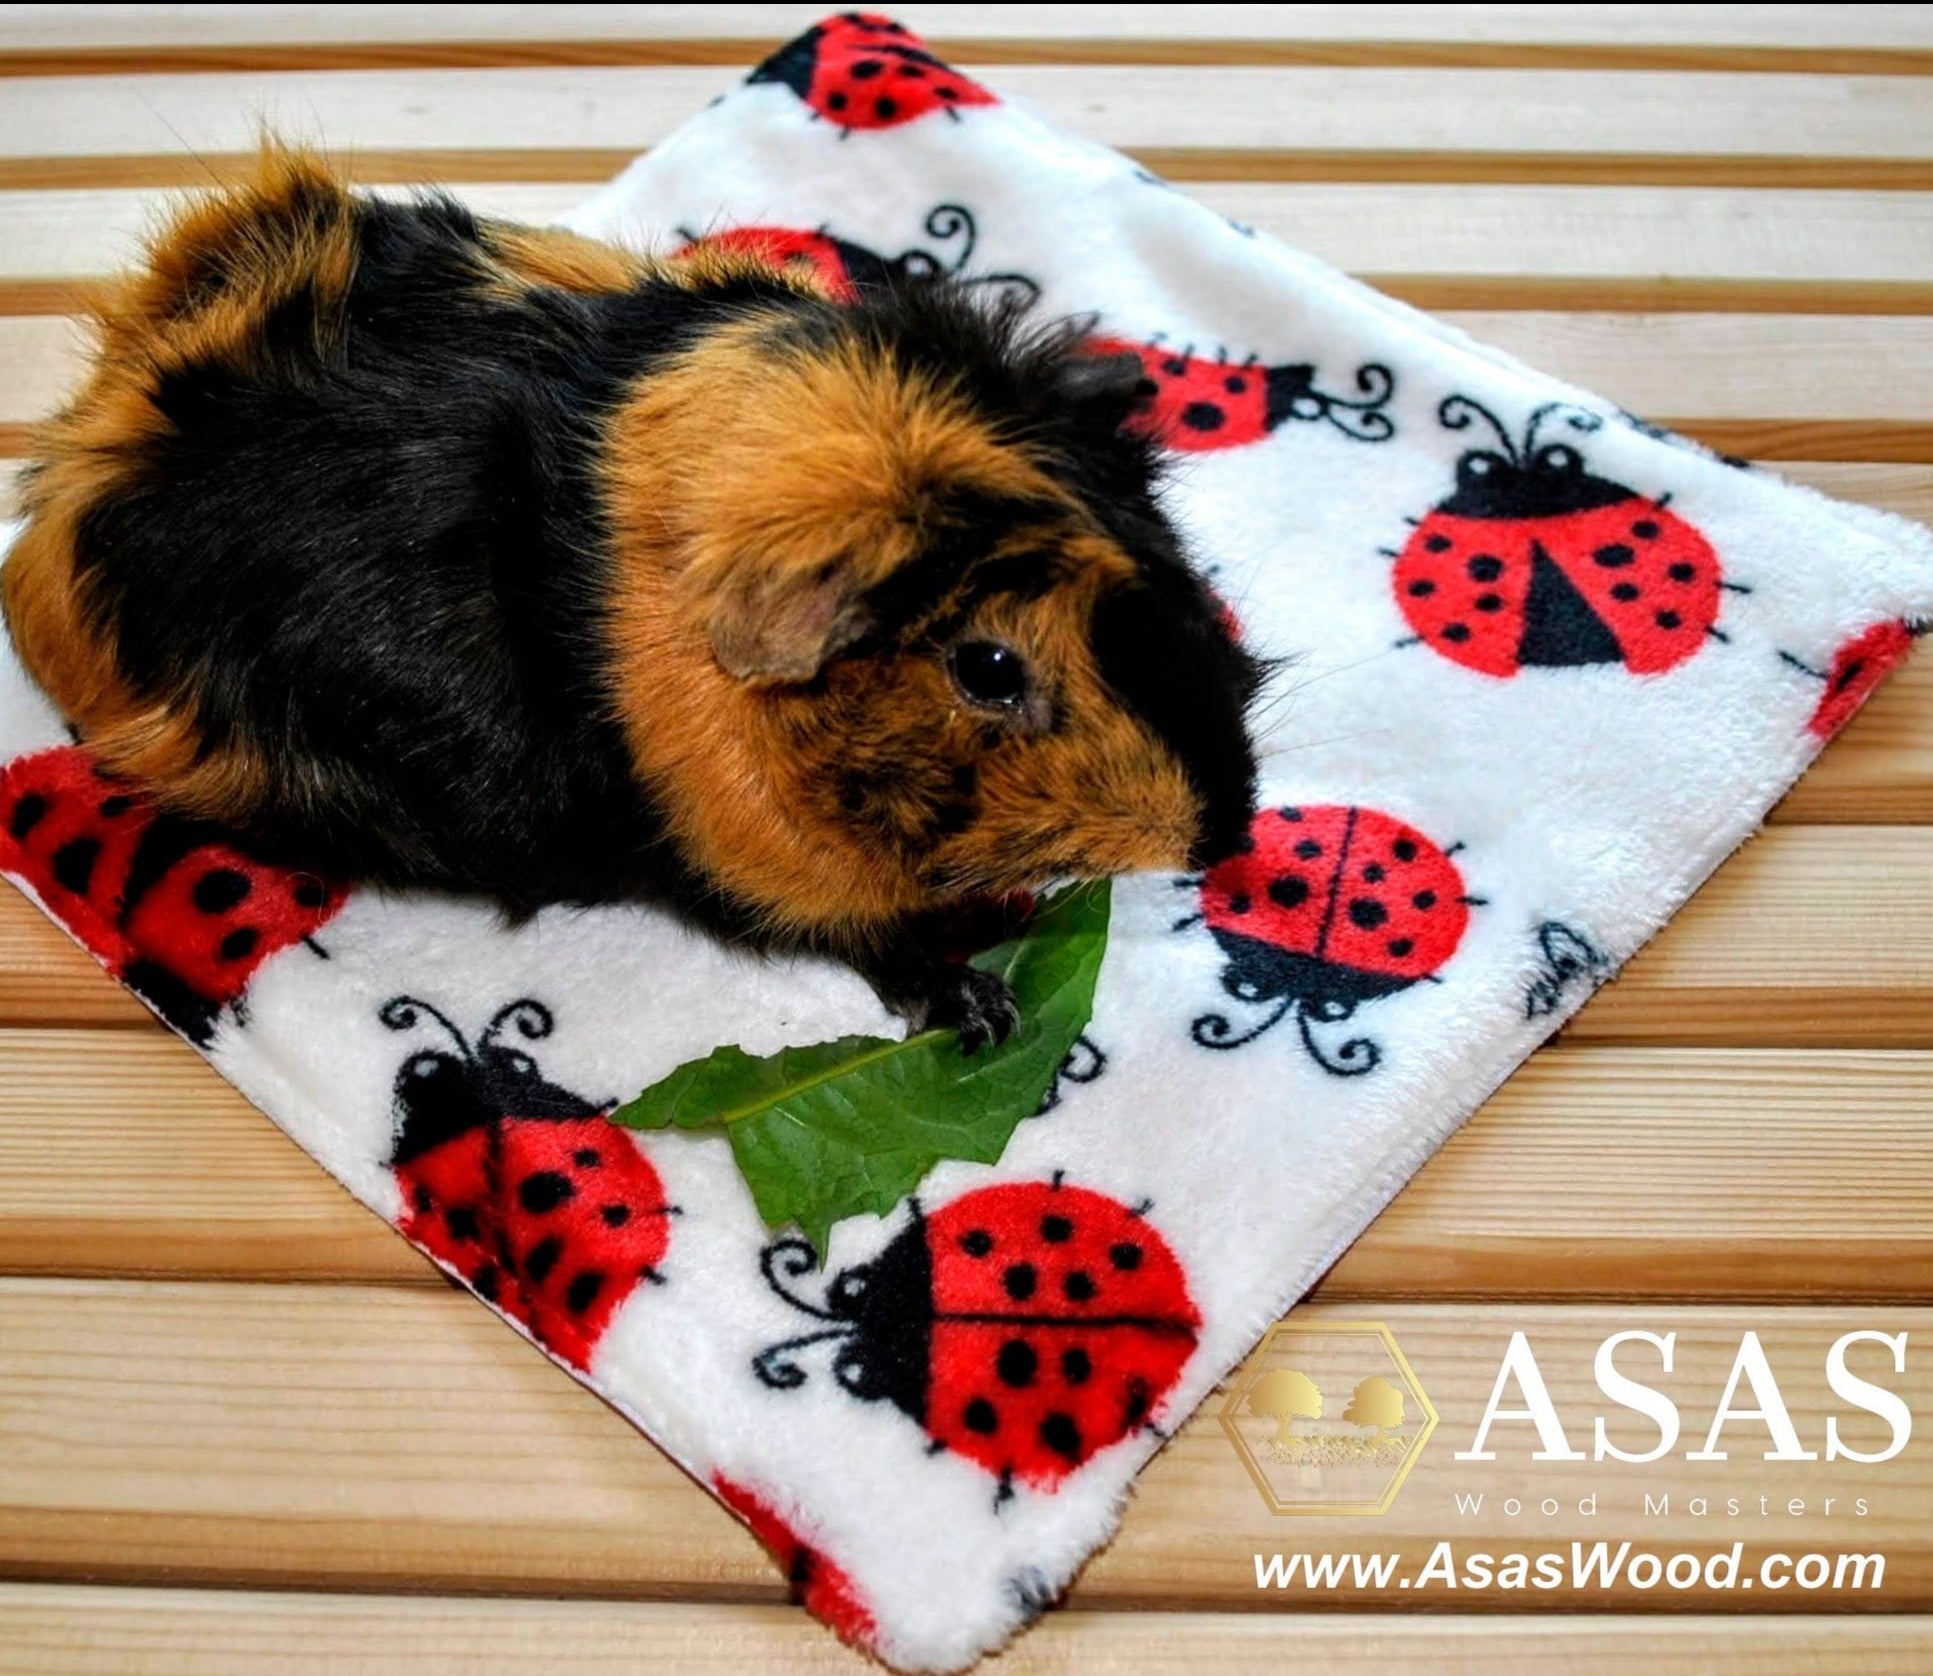 guinea pig on his fleece liner, made by asaswood